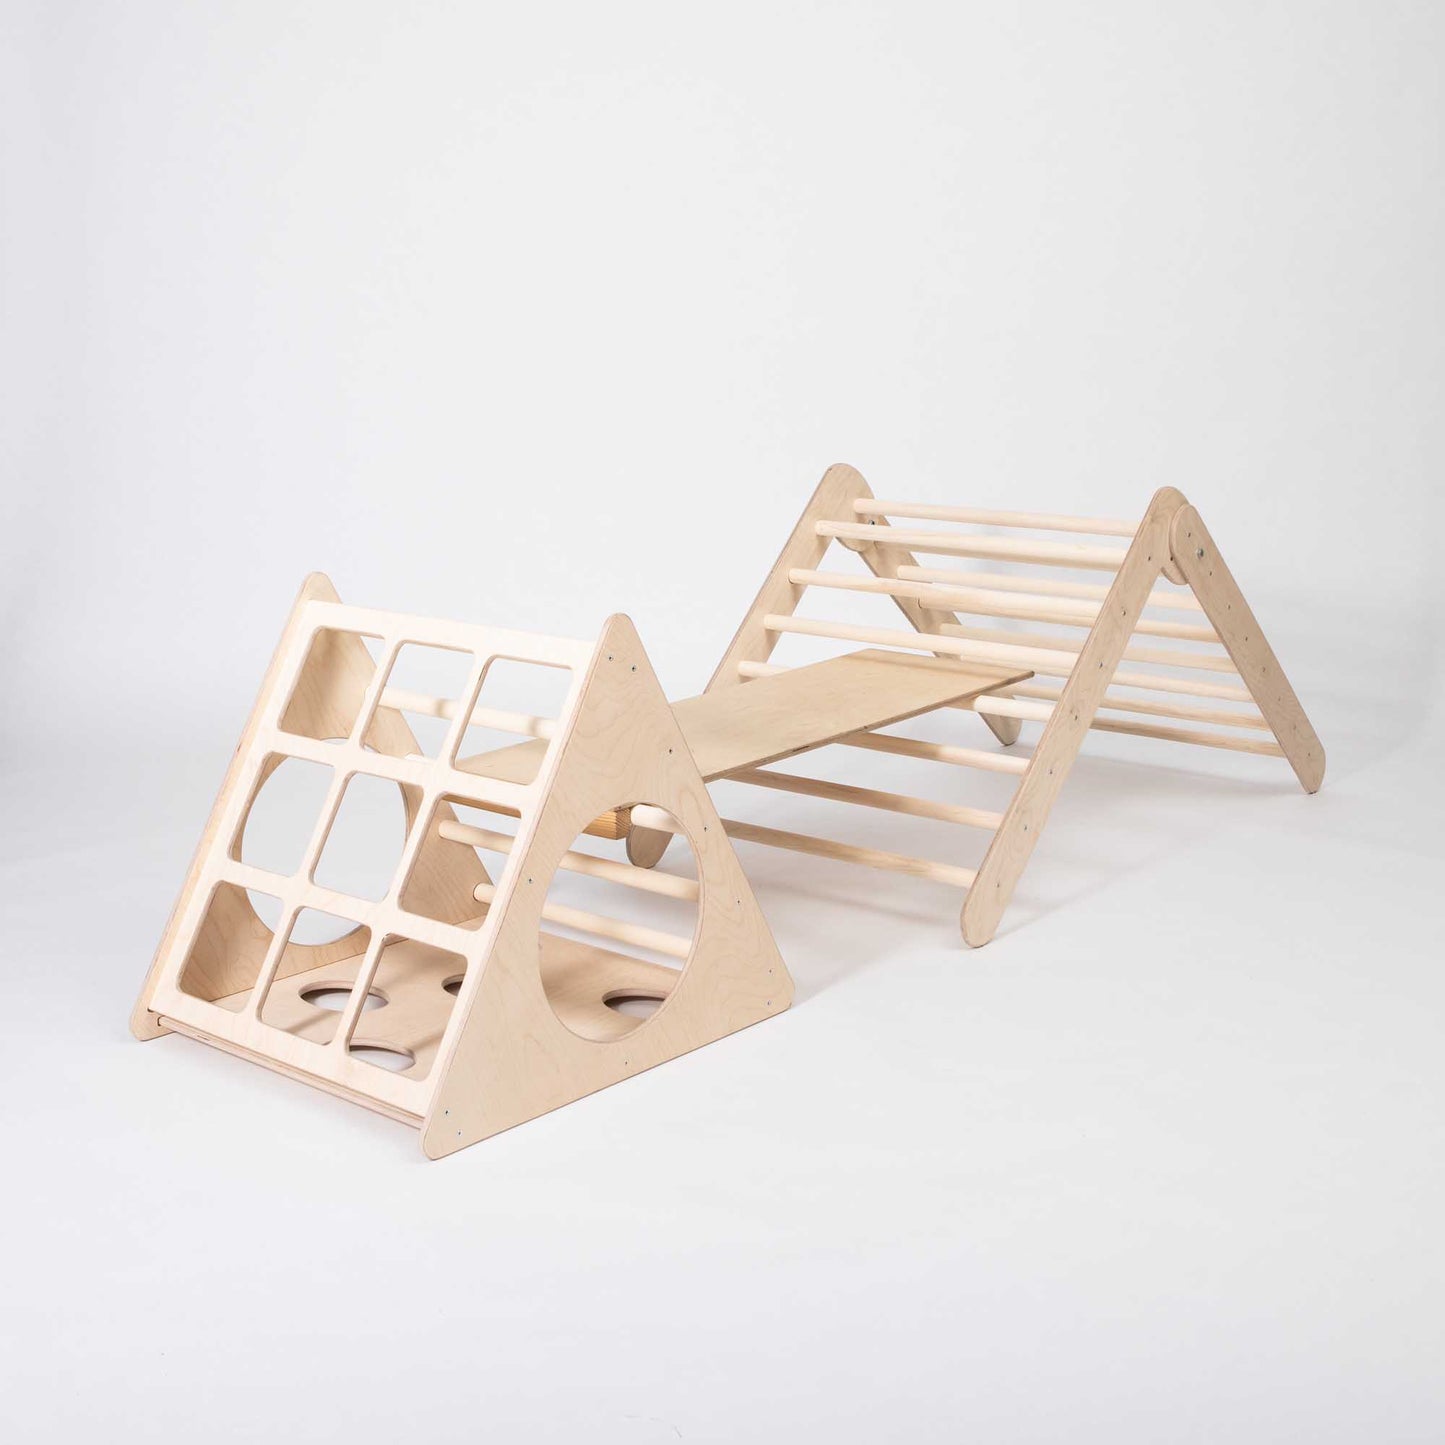 A wooden play structure with a Sweet Home From Wood climbing triangle on it.